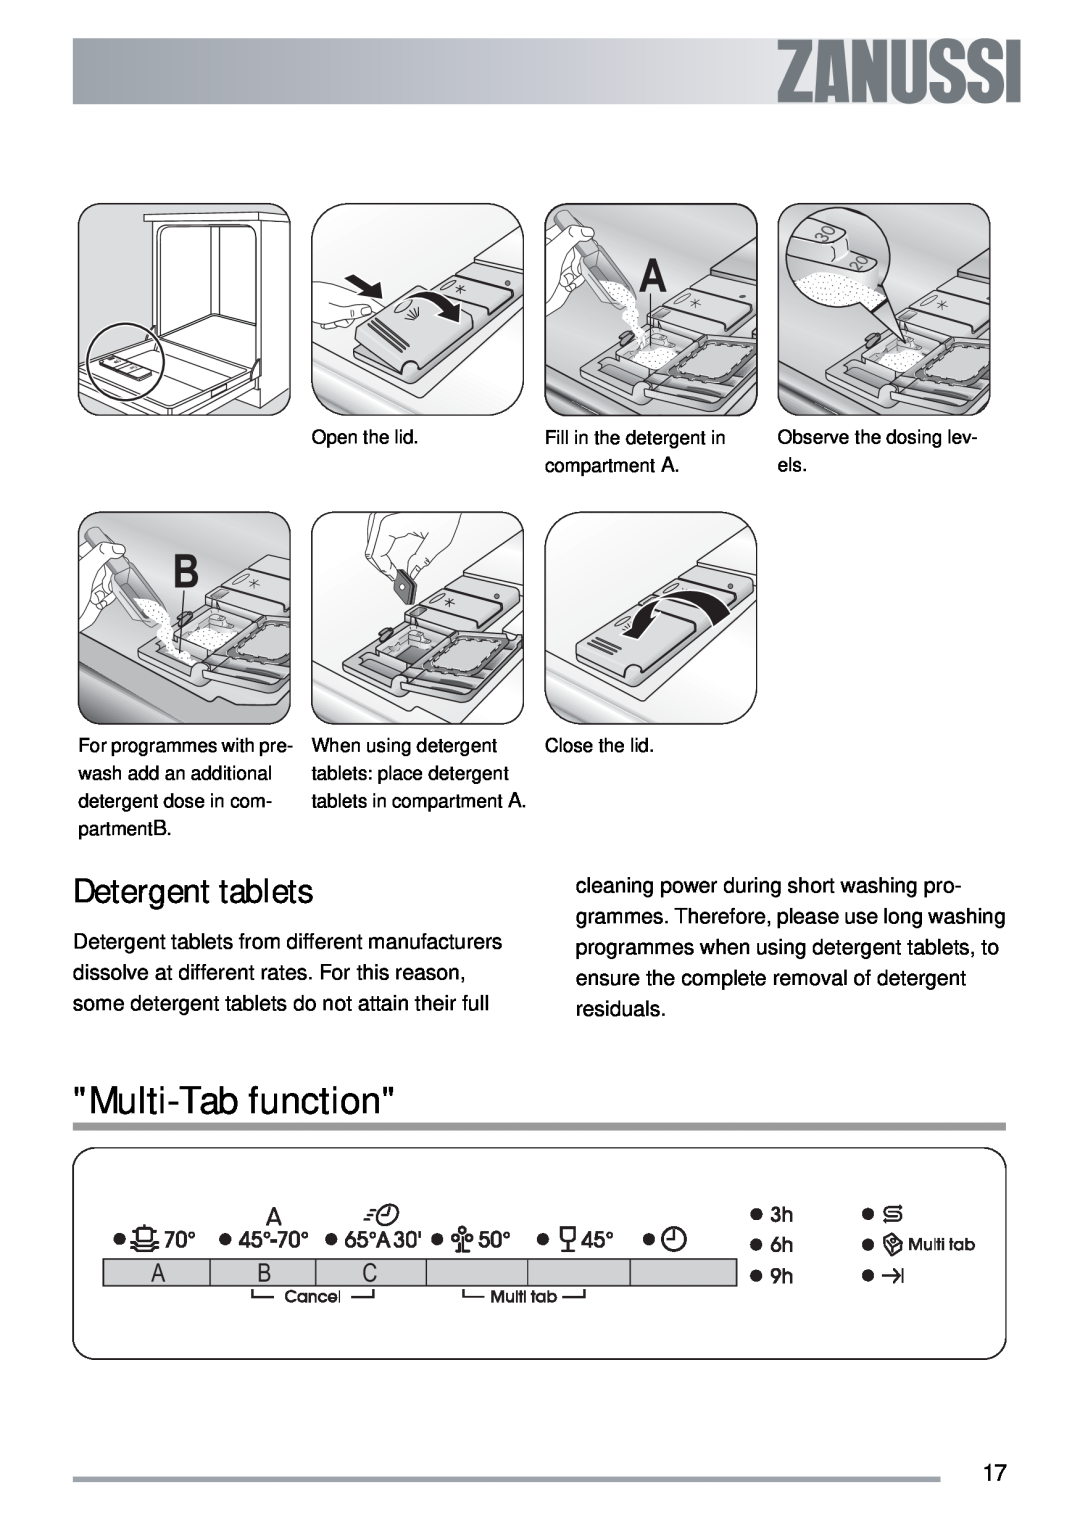 Zanussi ZDT 311 user manual Multi-Tab function, Detergent tablets 